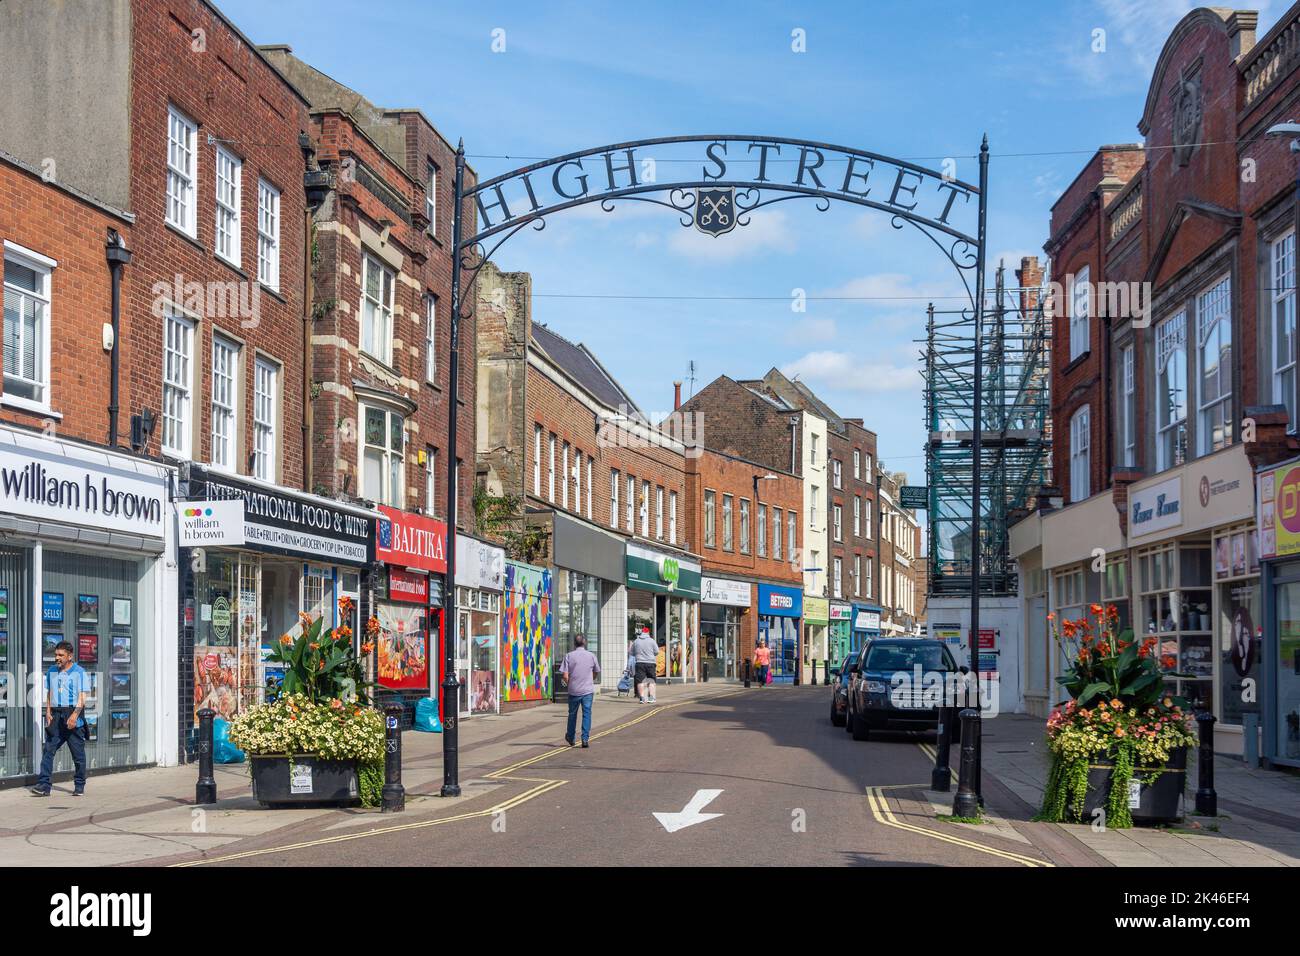 High Street, Wisbech, Cambridgeshire, Angleterre, Royaume-Uni Banque D'Images